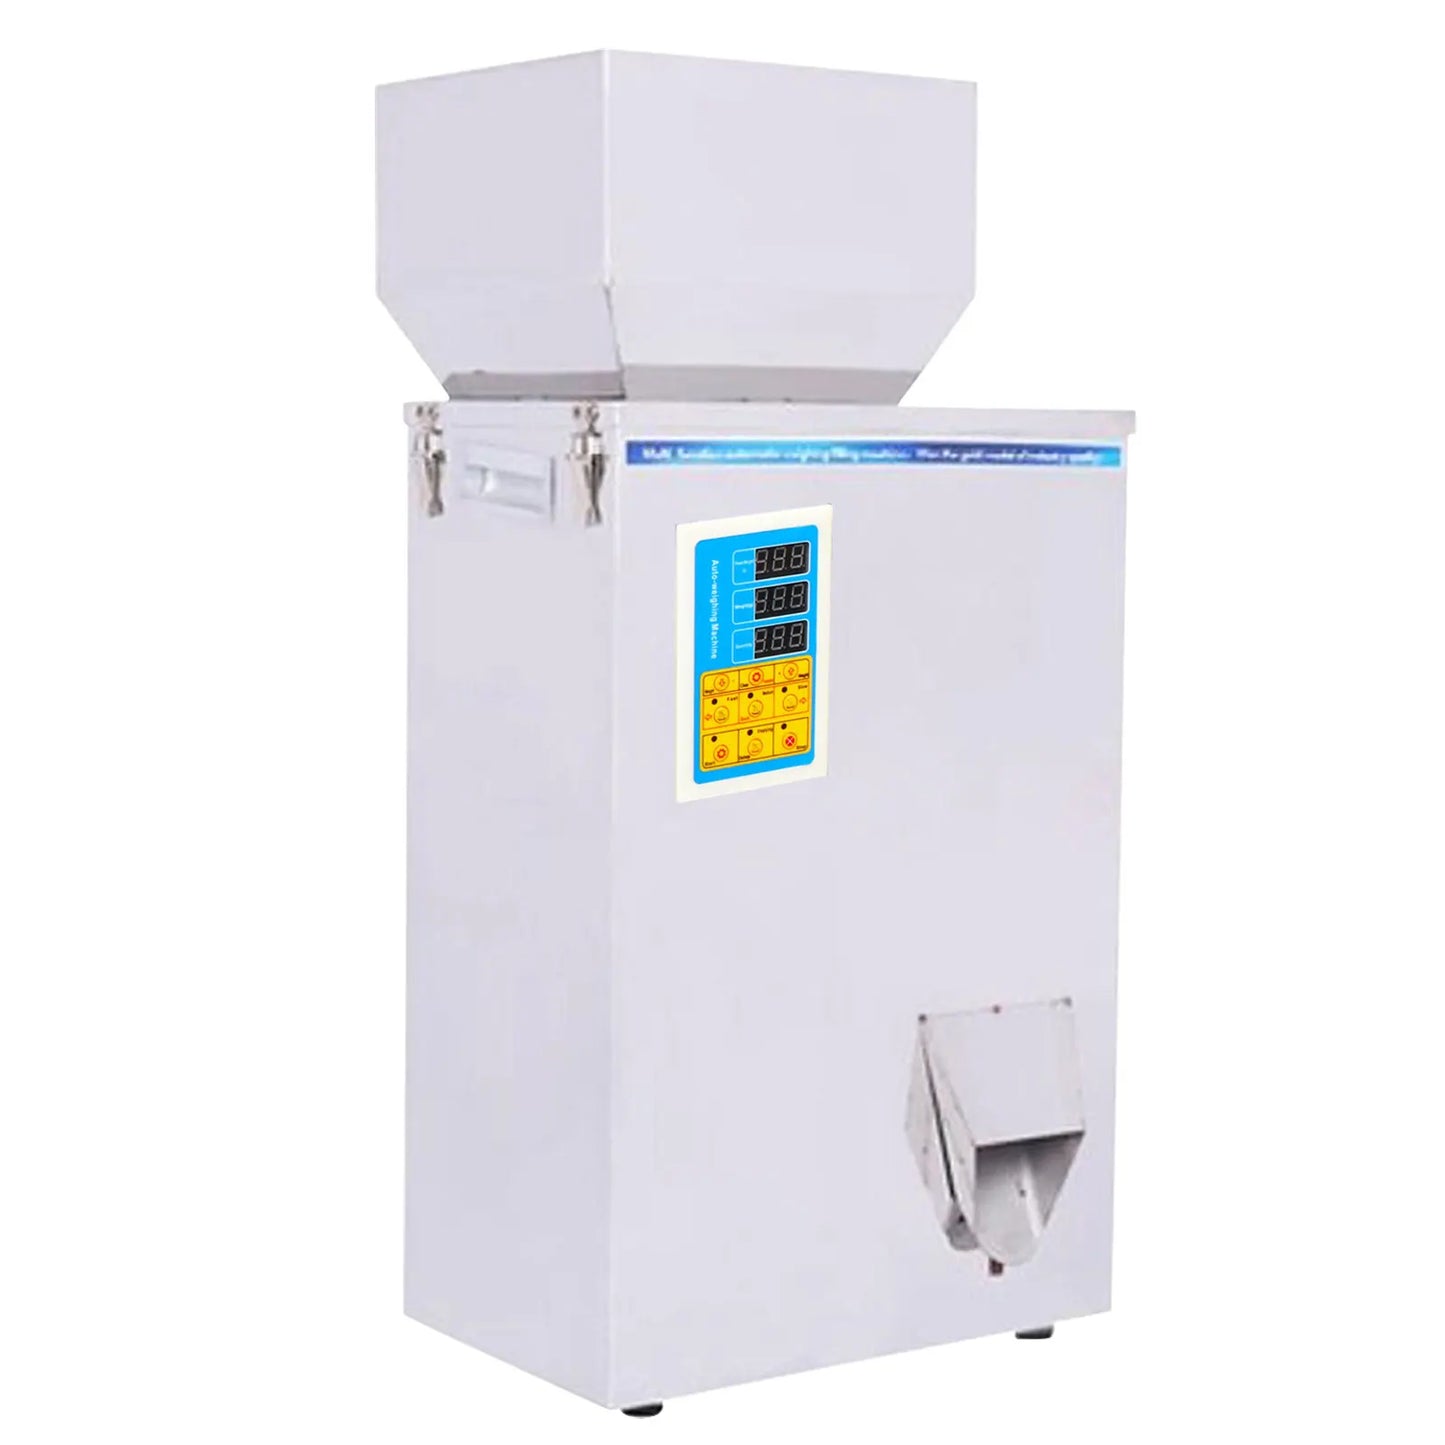 Weighing and Filling Machine for Cereal, Grains, Tea Powder Dispenser, 10-500g